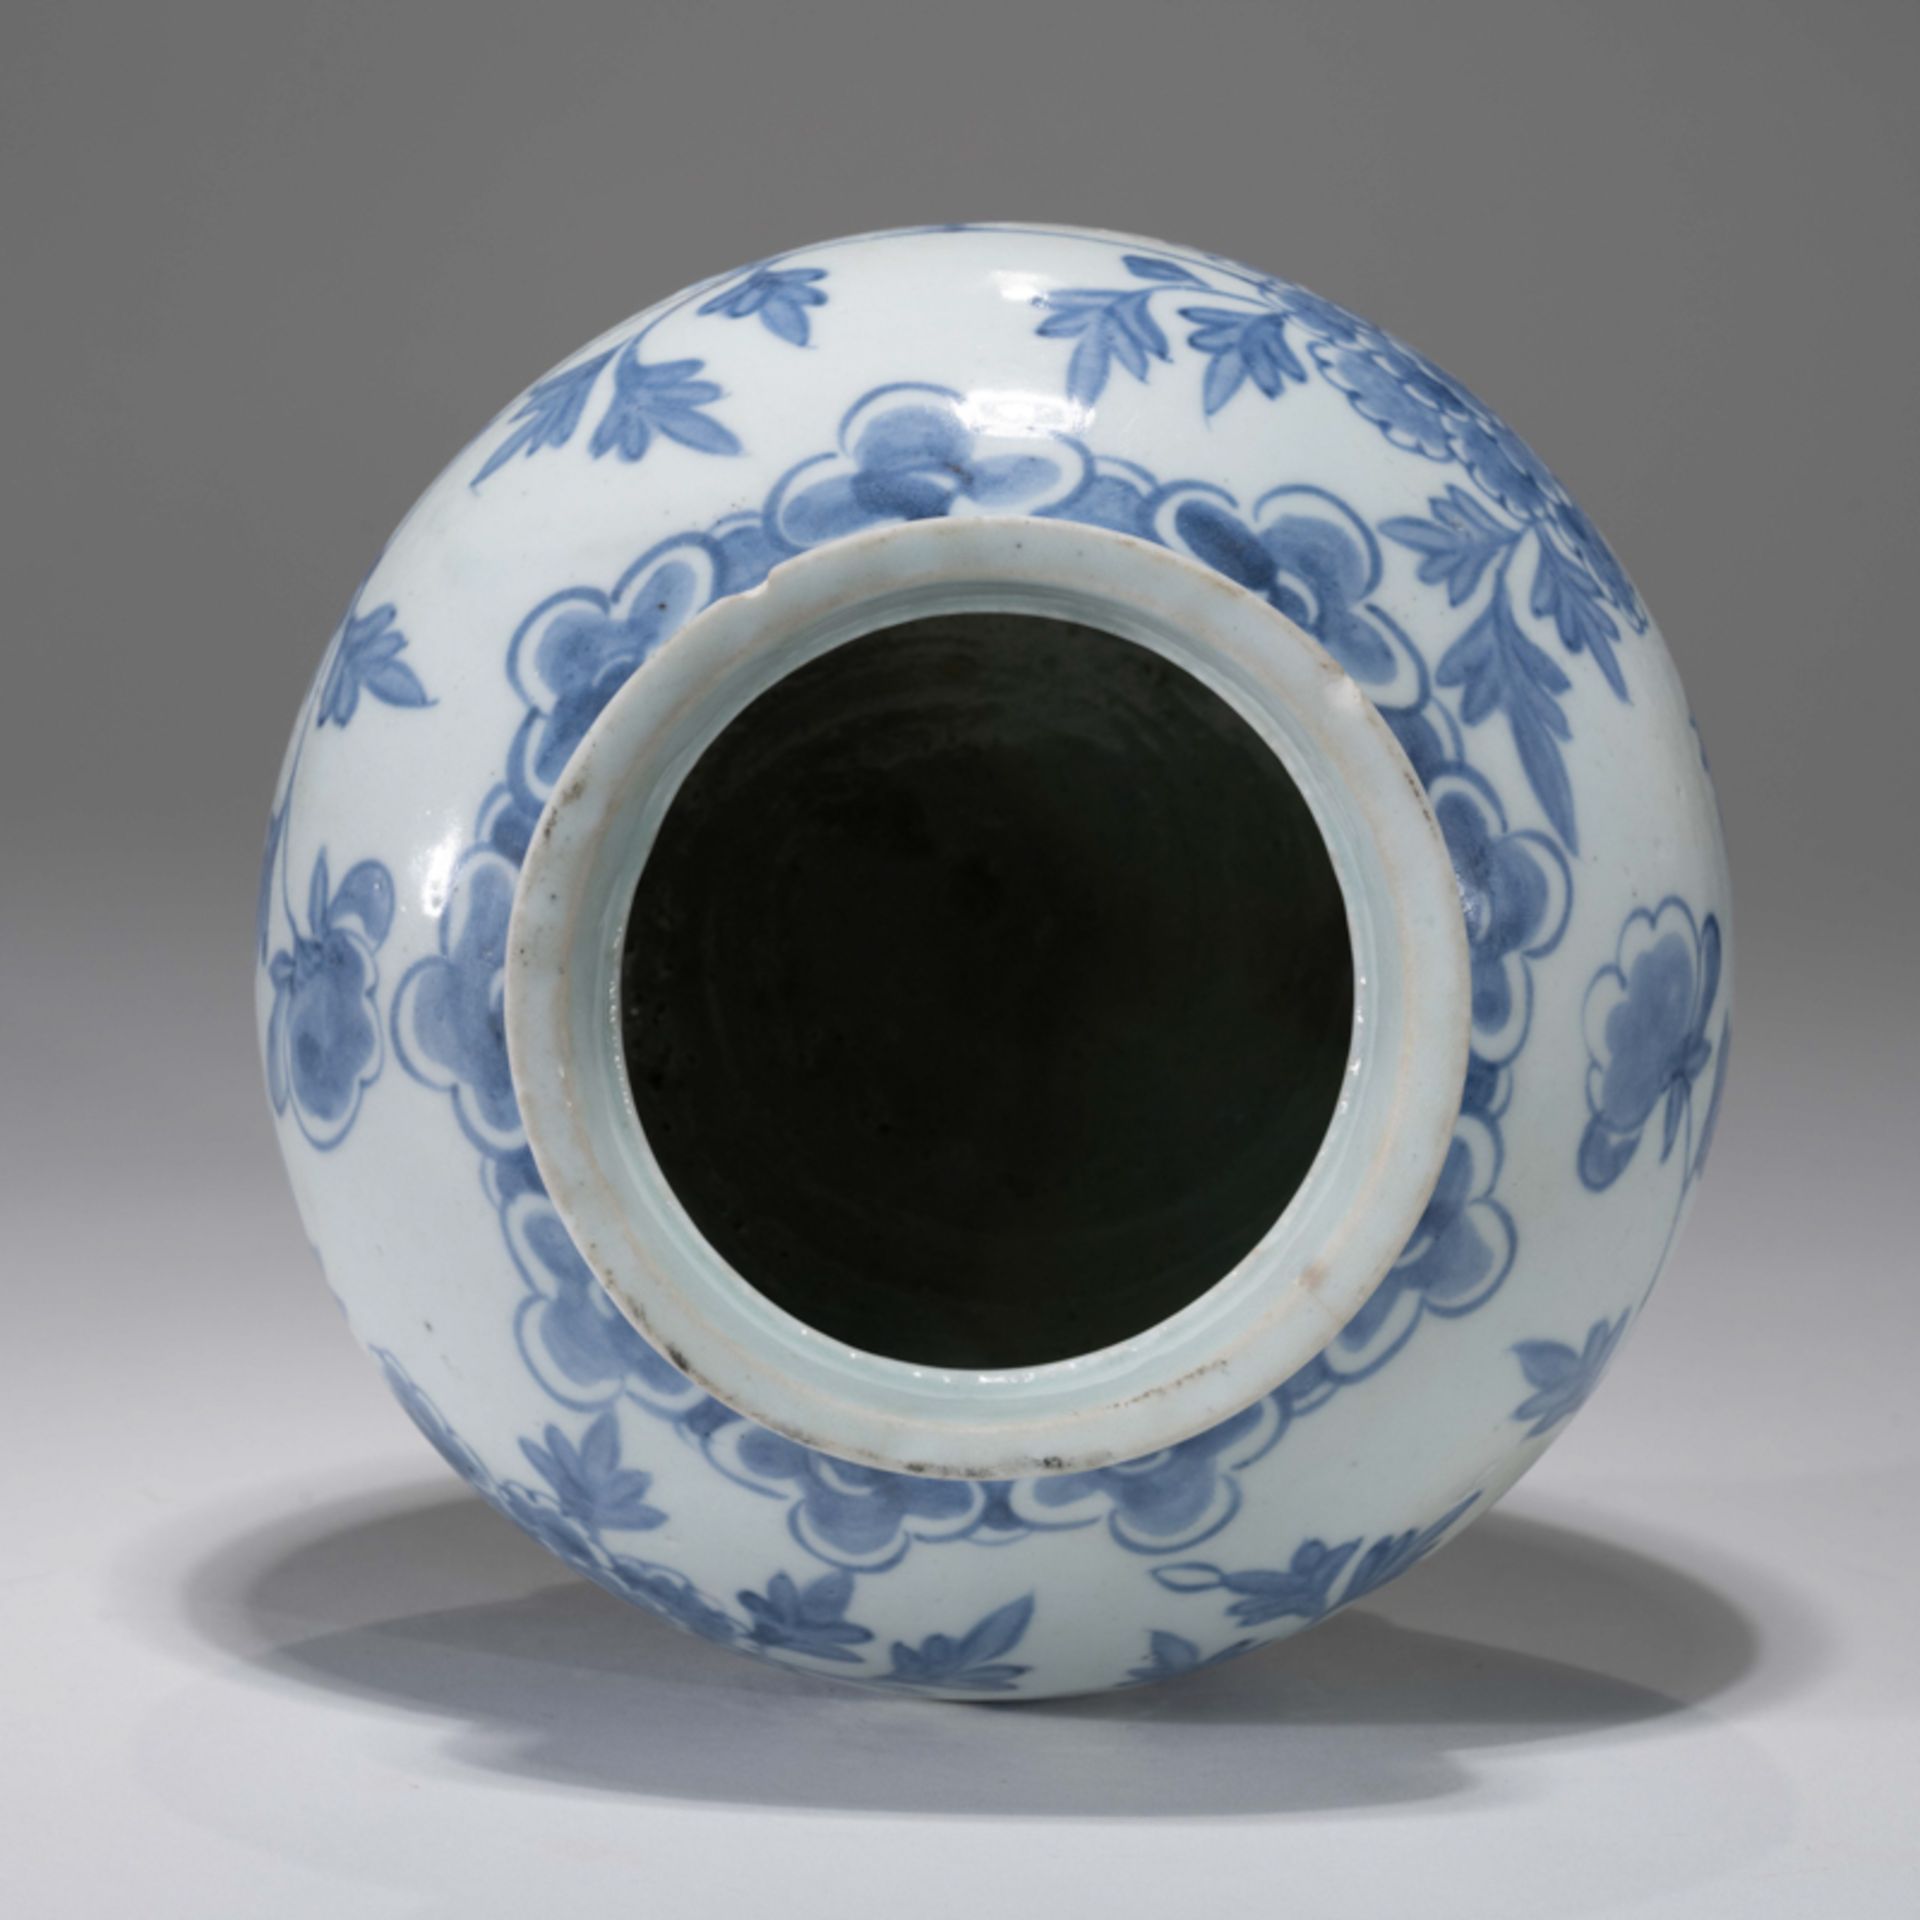 A KOREAN BLUE AND WHITE 'PEONY' ROUND POT, JOSEON DYNASTY - Image 6 of 9